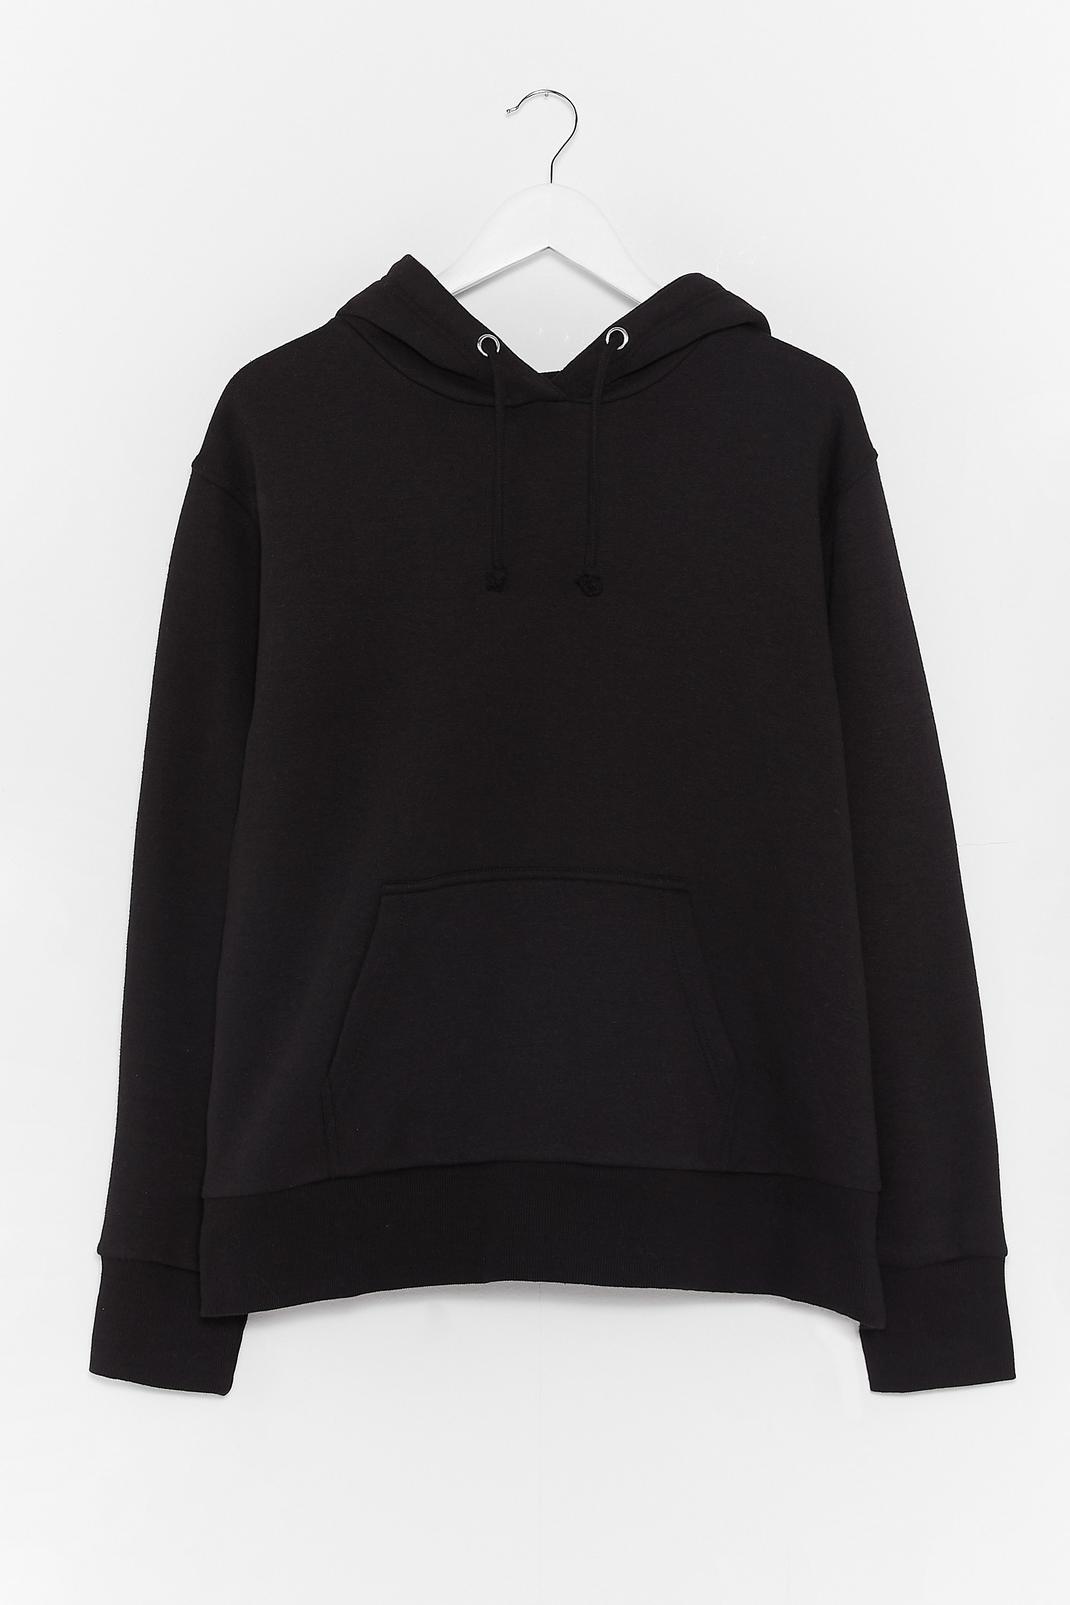 Too Busy Chilling Plus Pullover Hoodie | Nasty Gal